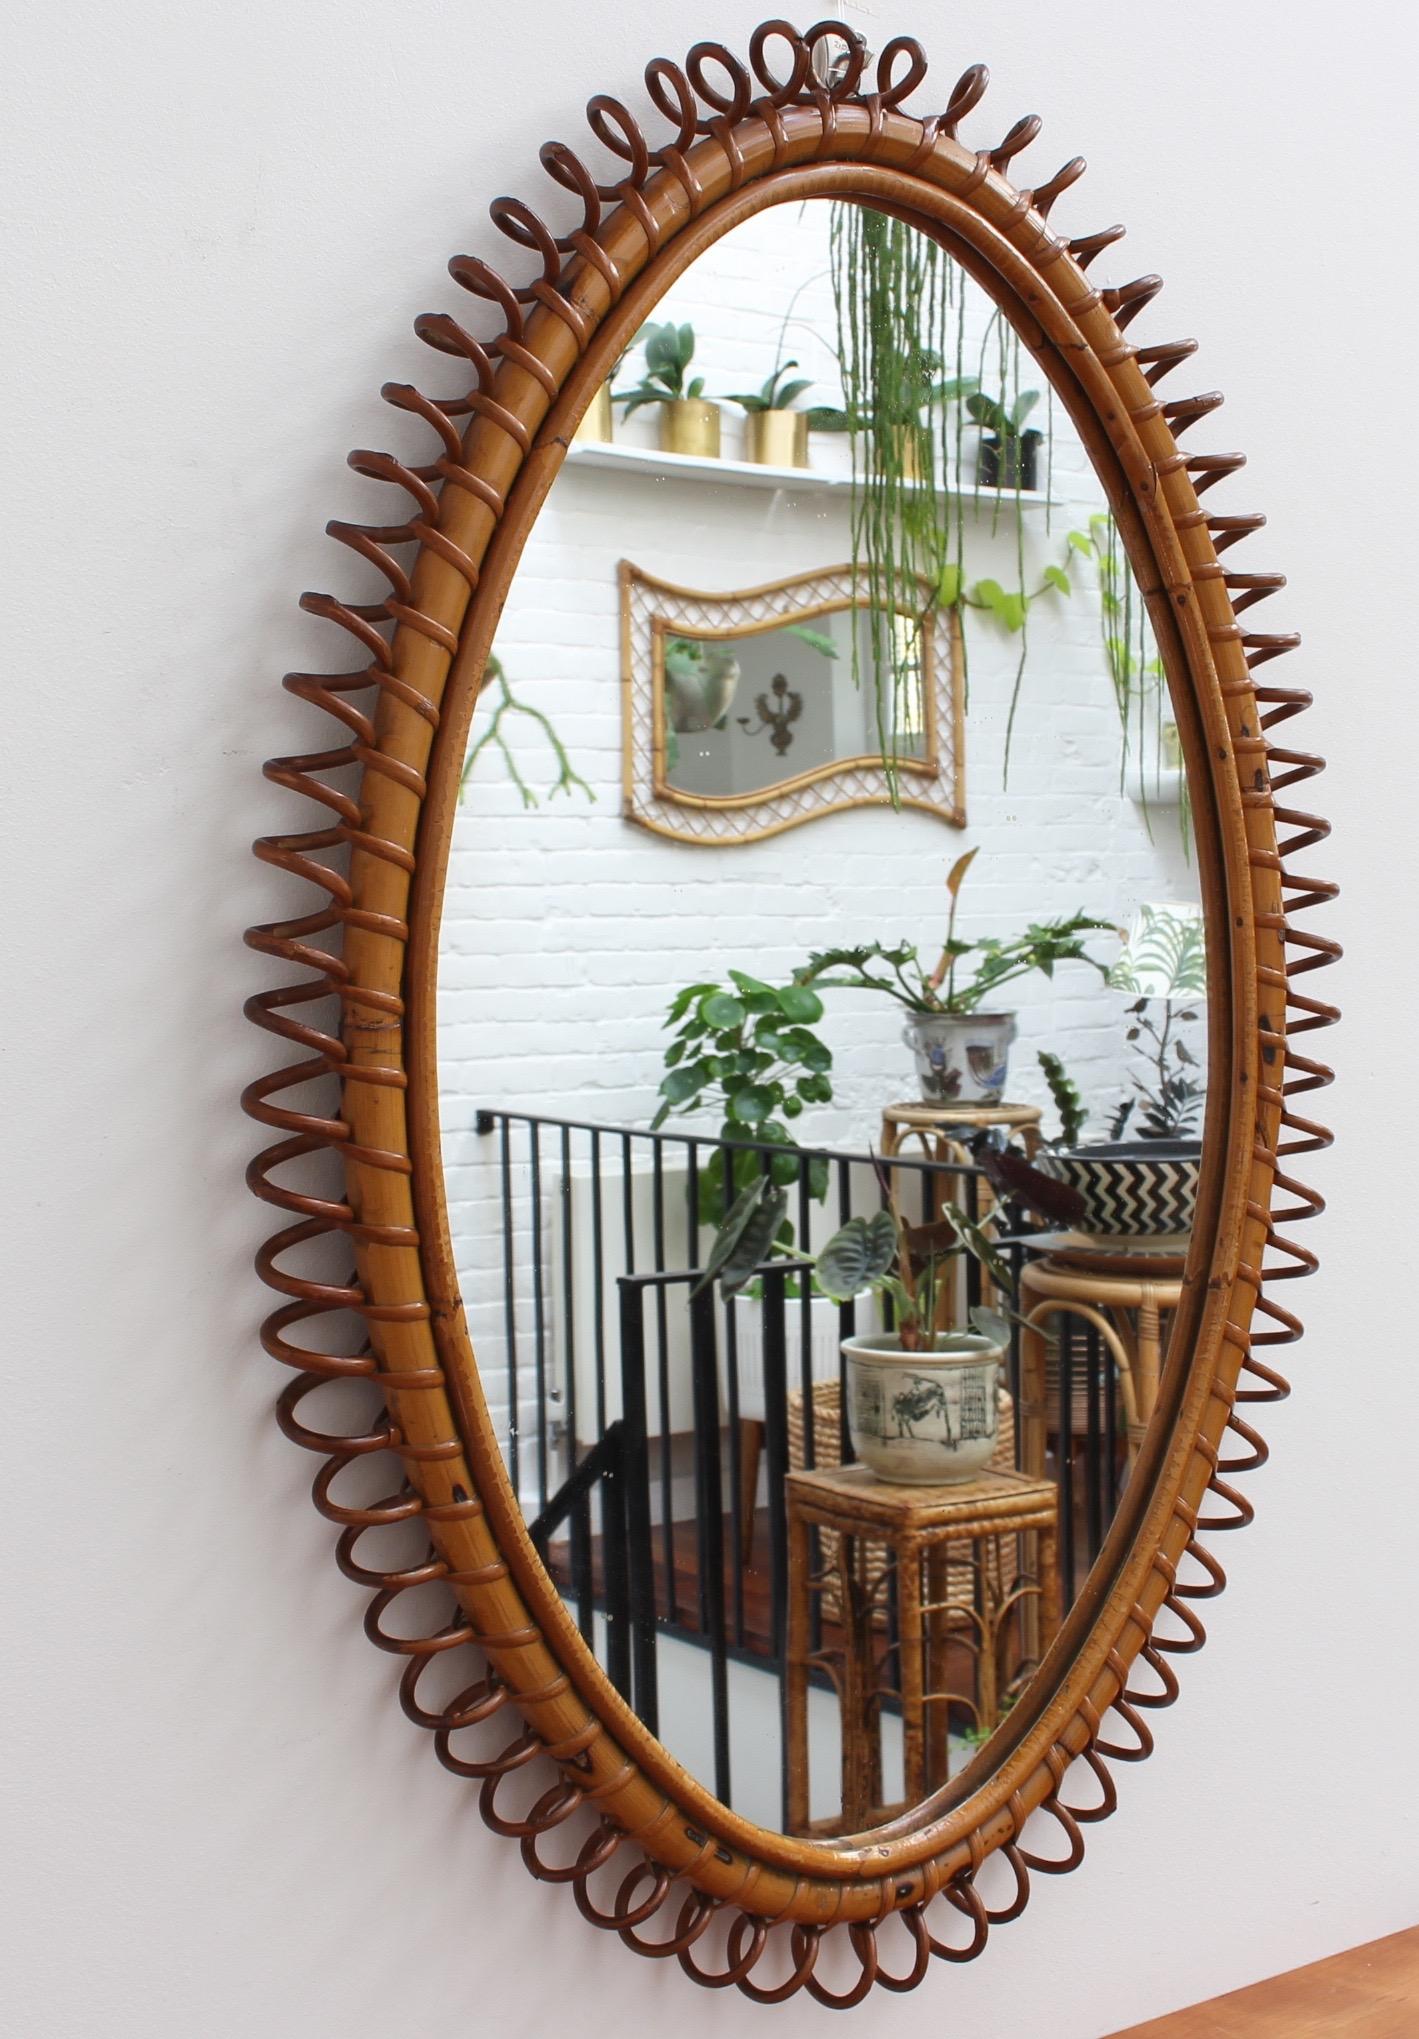 Italian rattan wall mirror (circa 1960s). This mirror has an oval form with delightful 'telephone line' shapes repeating around the rattan cane frame. The characterful, aged patina on the mirror frame attests to its age and adds to its charm. In